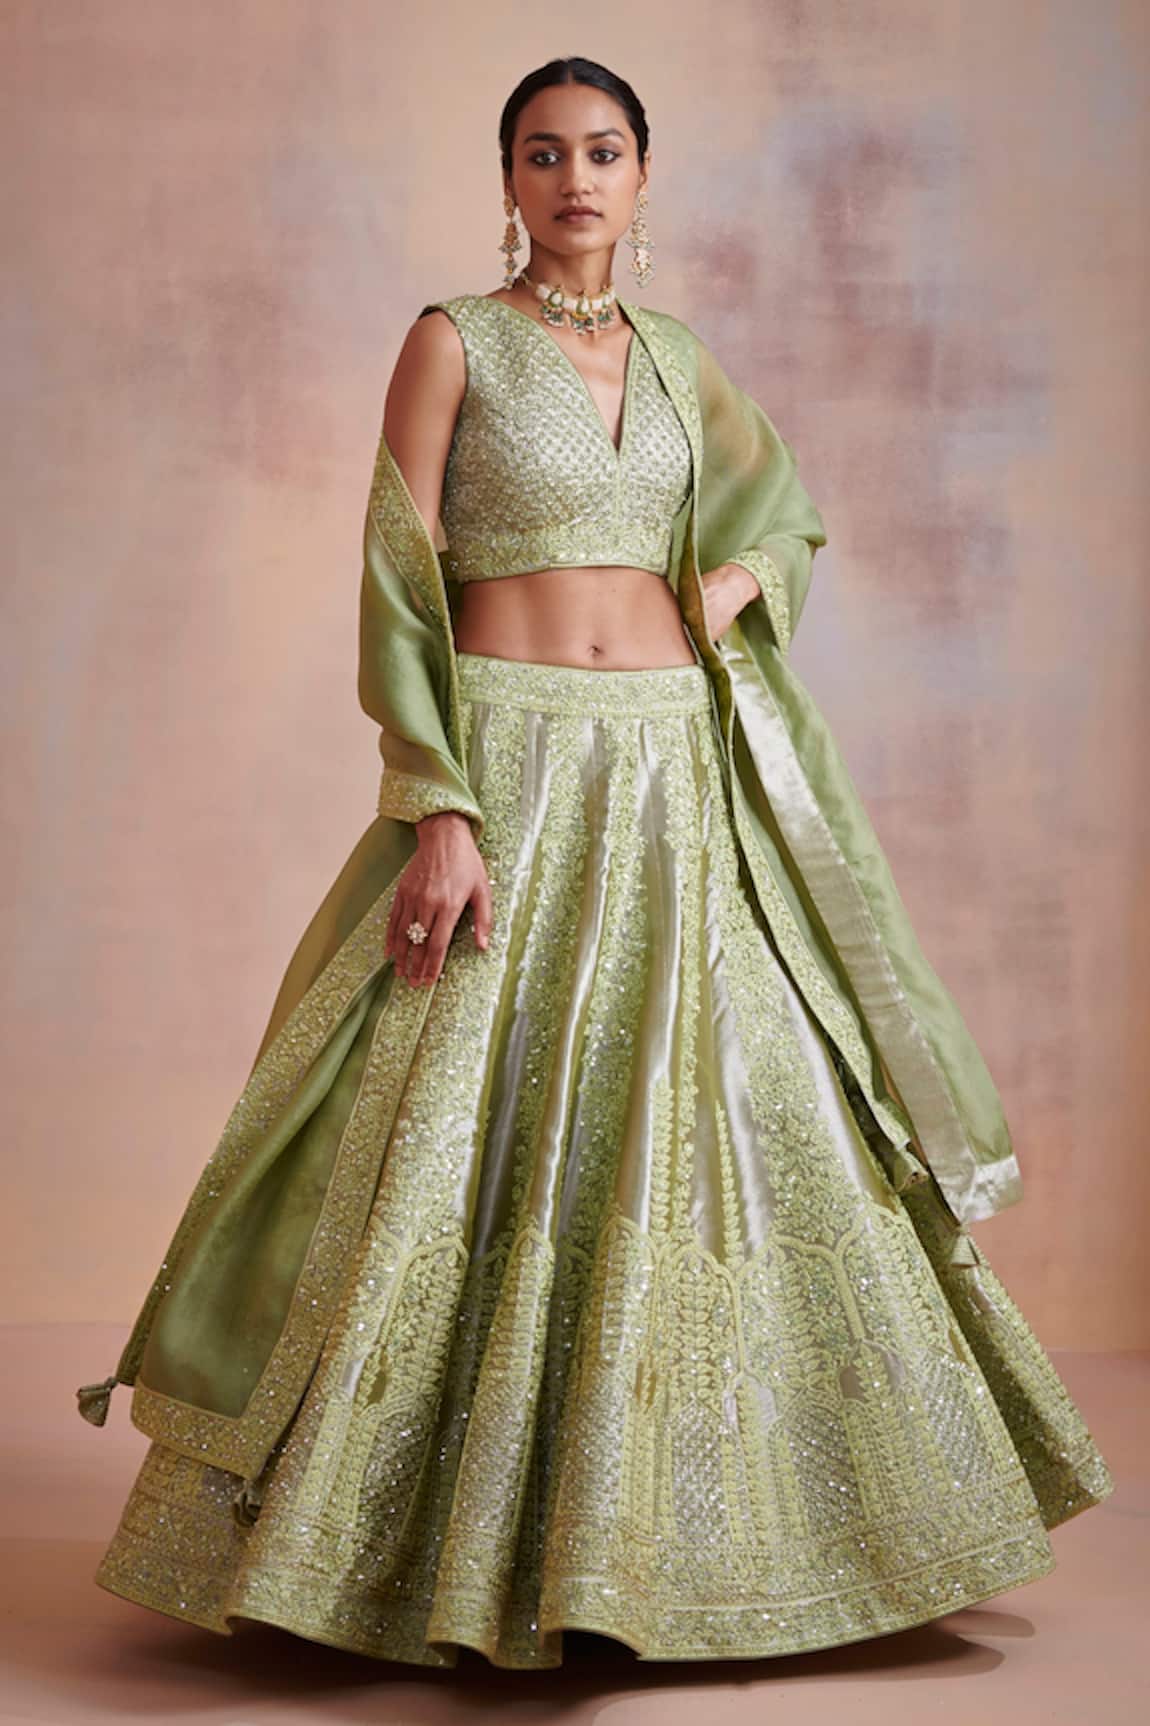 Looking For A Perfect Lehenga In Jaipur For The Big Day? Say No More -  Rajasthan Studio